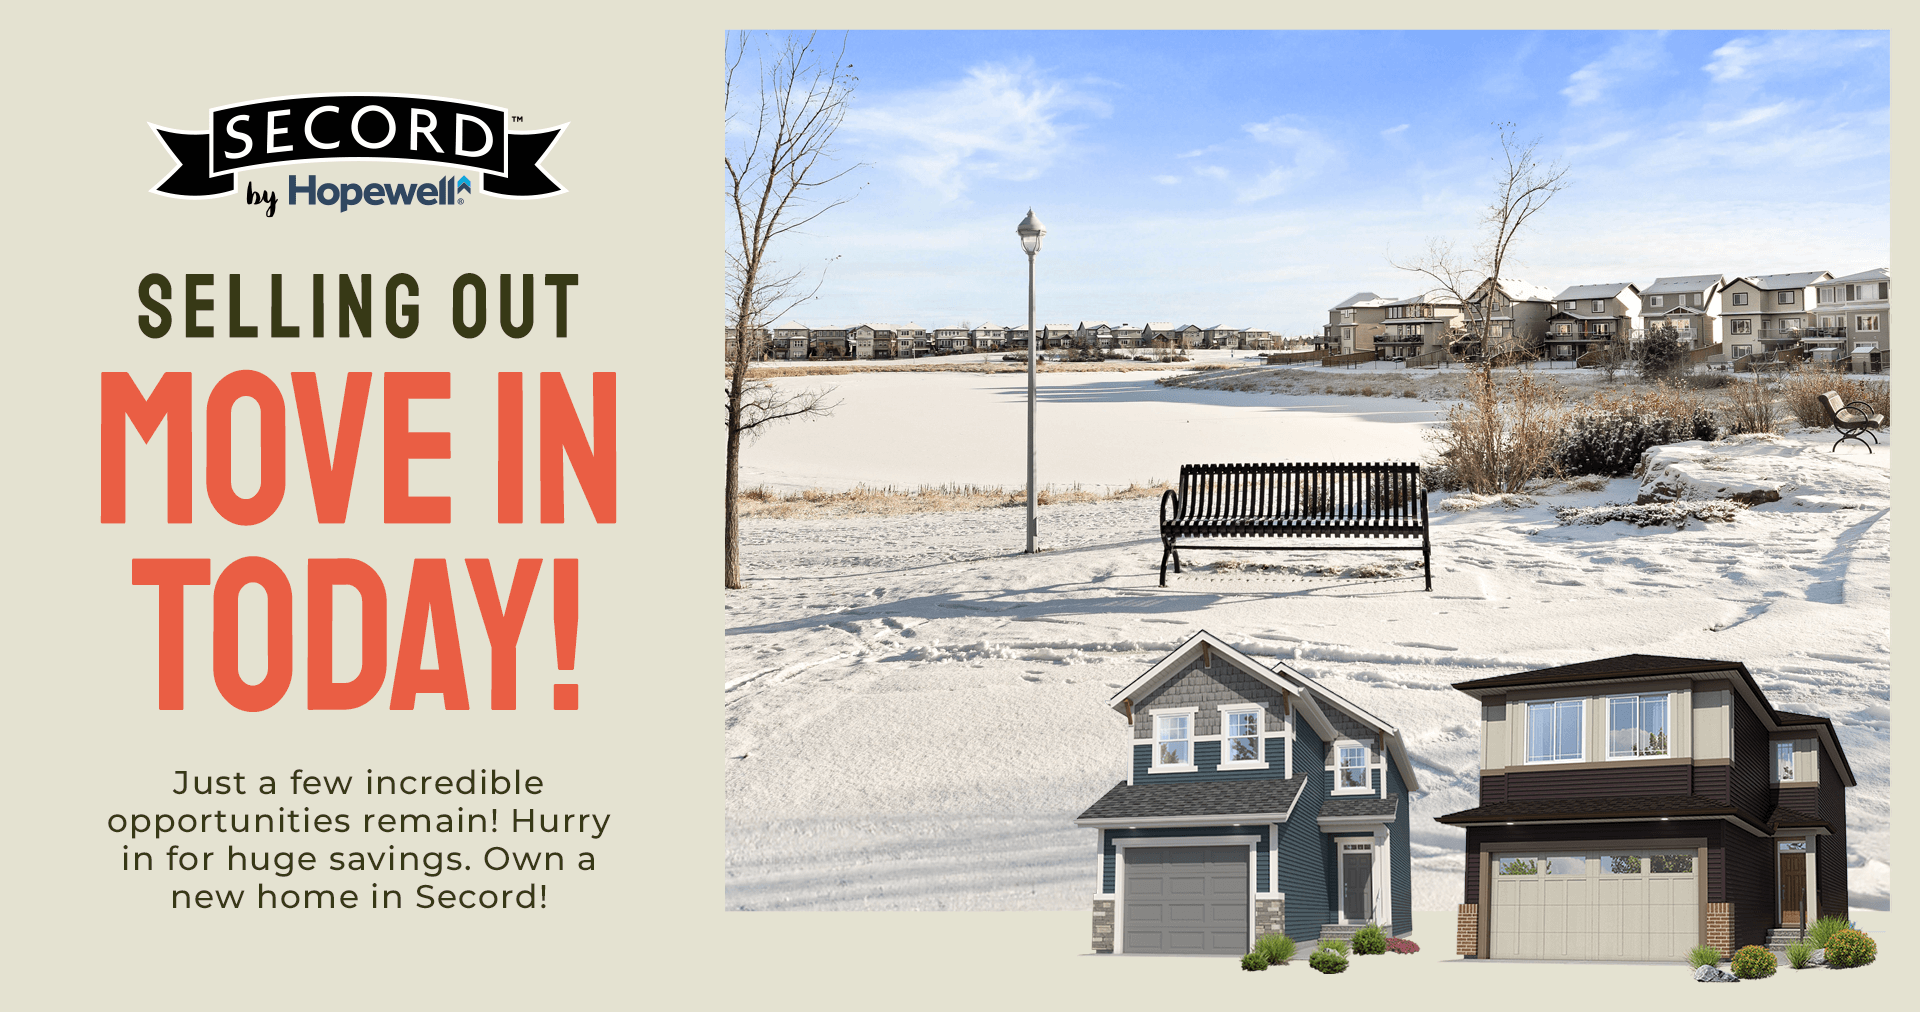 Text: Selling Out. Move In Today! Just a few incredible opportunities remain! Hurry in for huge savings. Own a new home in Secord. Image: Snow covered wetland area in Secord